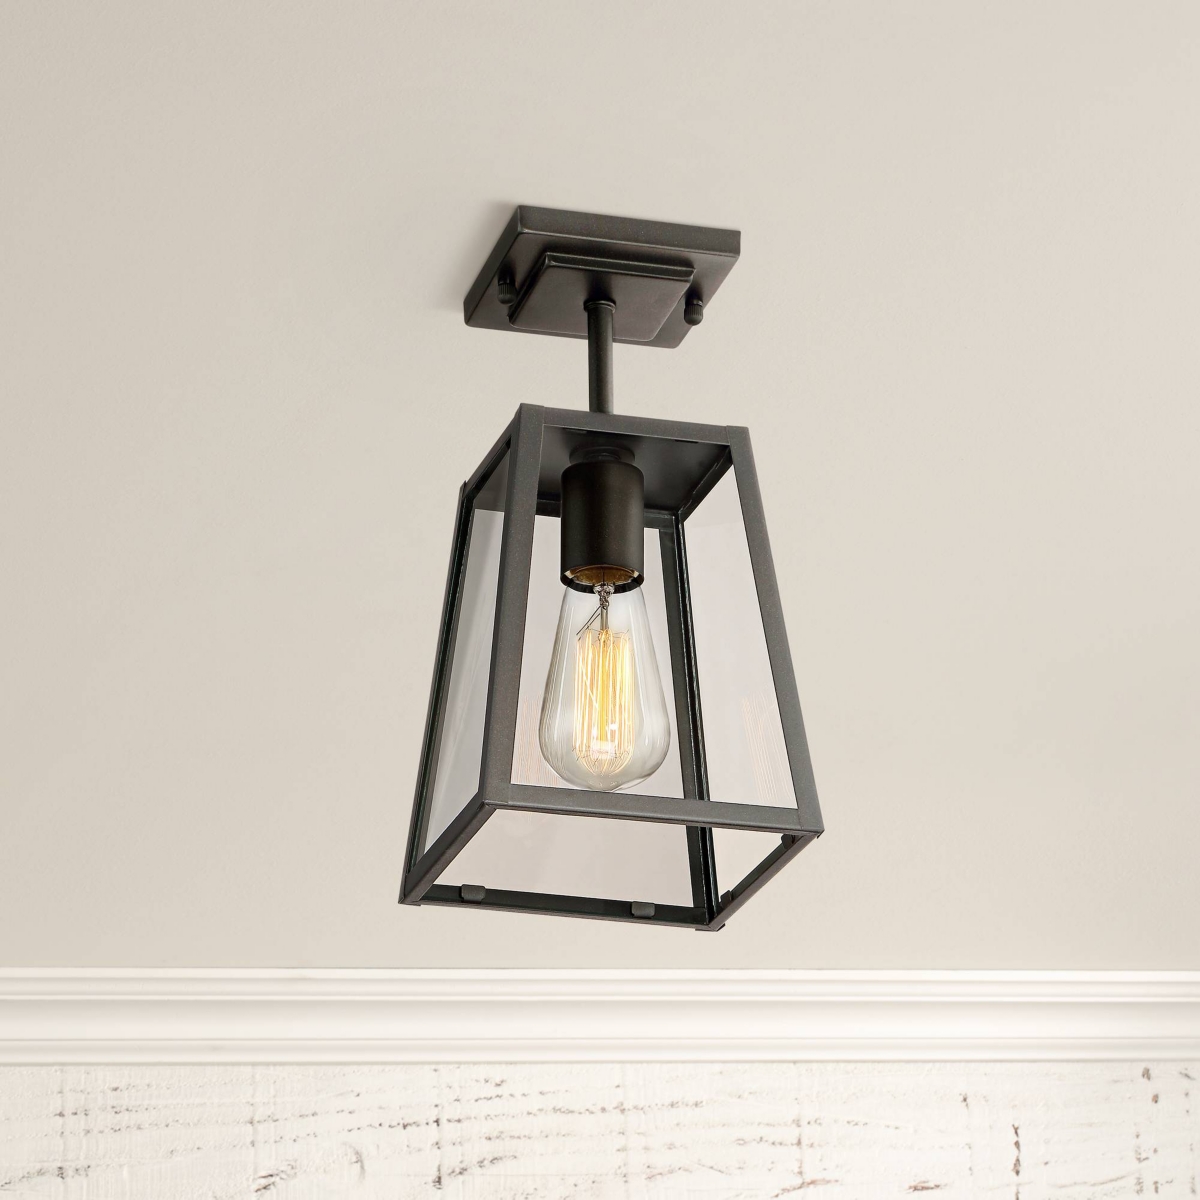 Arrington Modern Industrial Semi Flush-Mount Outdoor Ceiling Light Fixture Mystic Black 6" Clear Glass Damp Rated for Exterior House Porch Patio Outsi